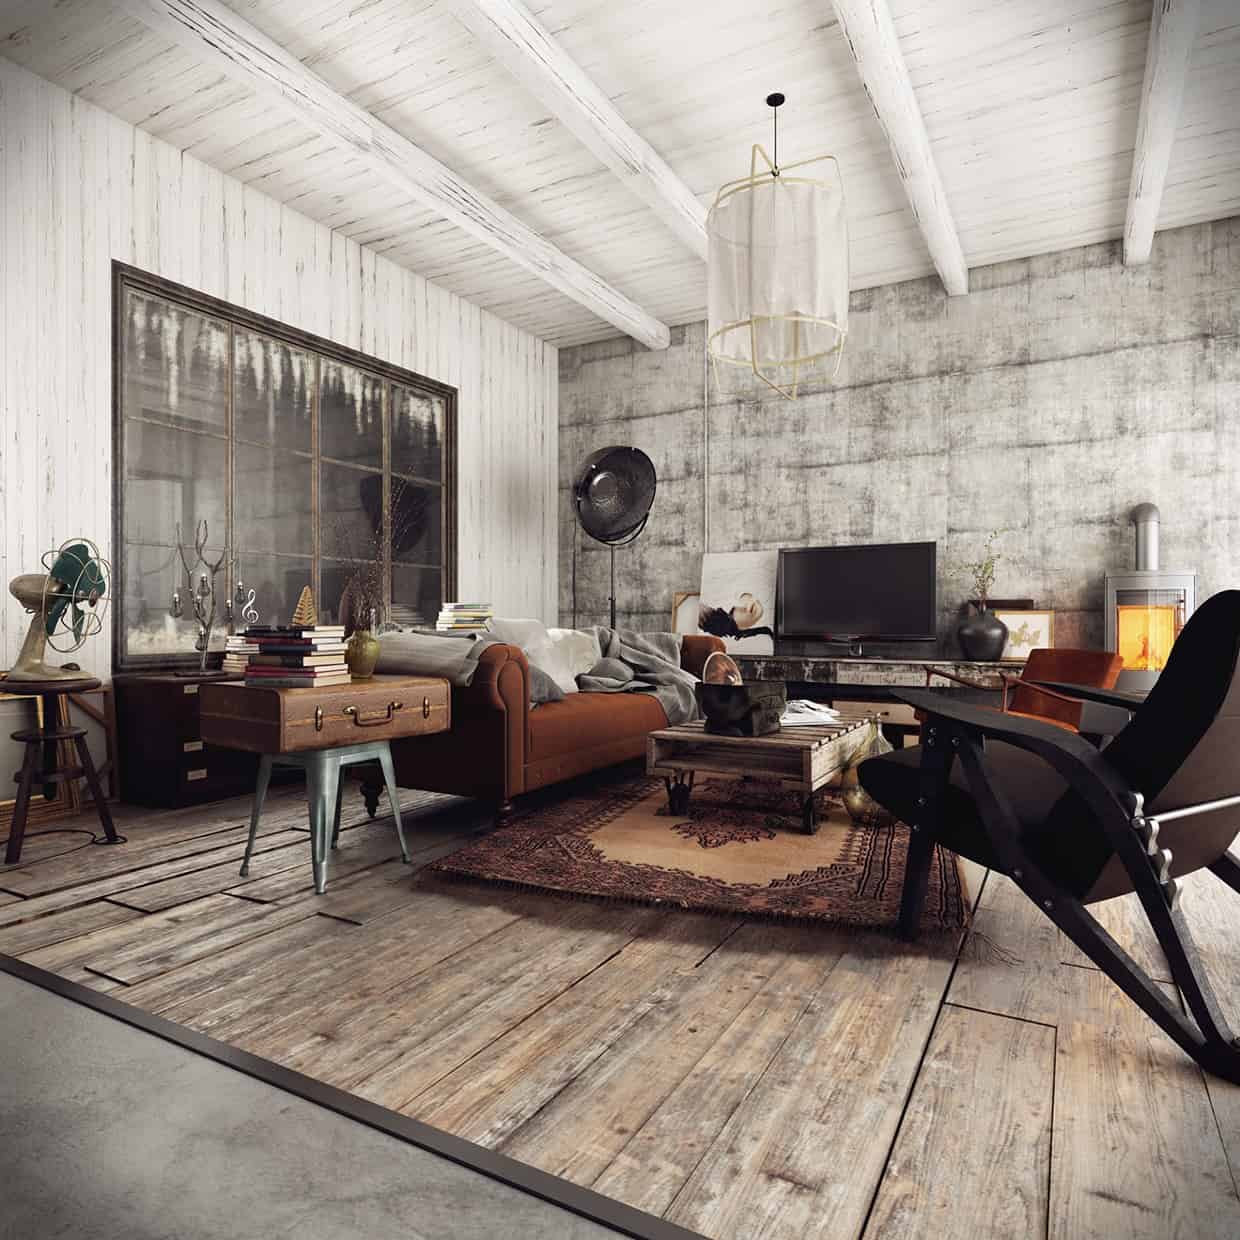 Raw And Real: The Appeal Of Industrial Home Decor